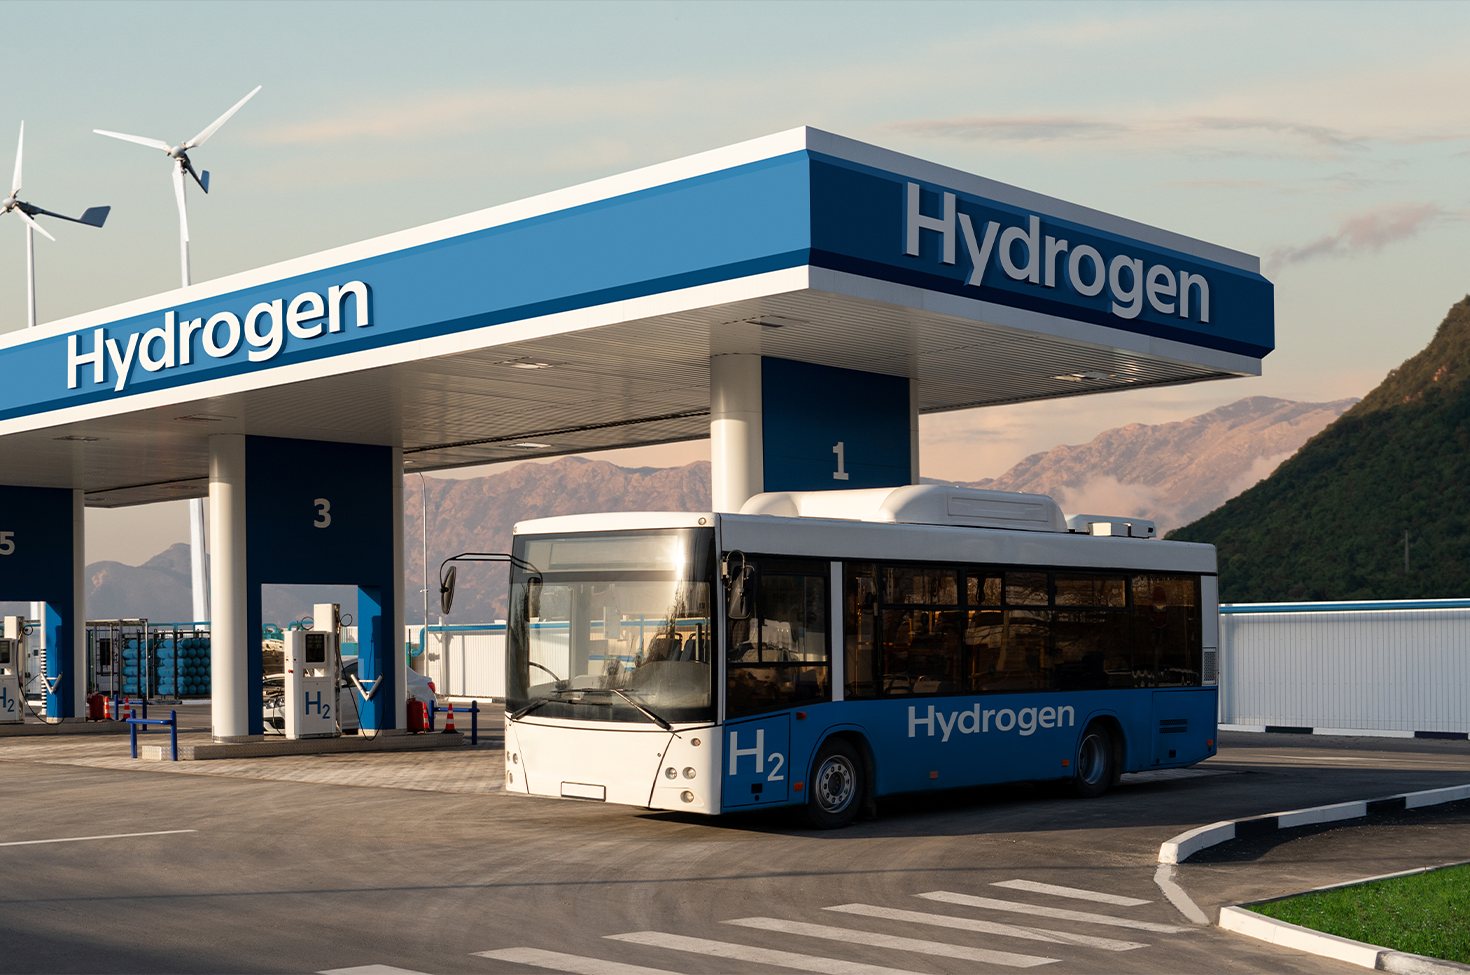 hydrogen gas station and bus